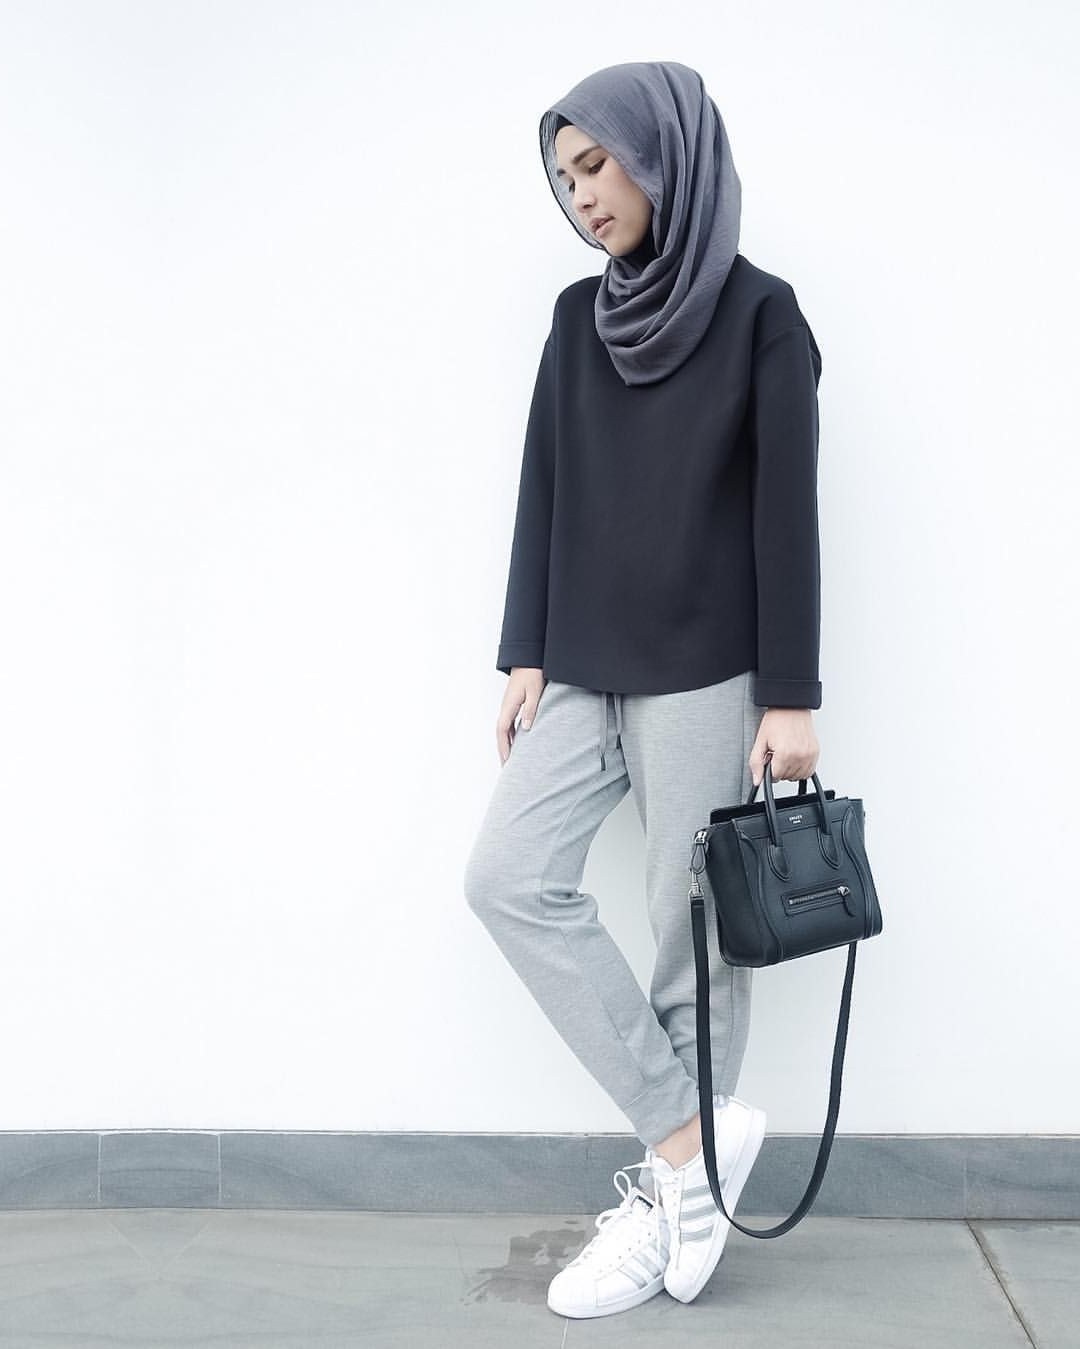 Model Fashion Muslimah Casual D0dg See This Instagram Photo by Ranihatta • 3 123 Likes